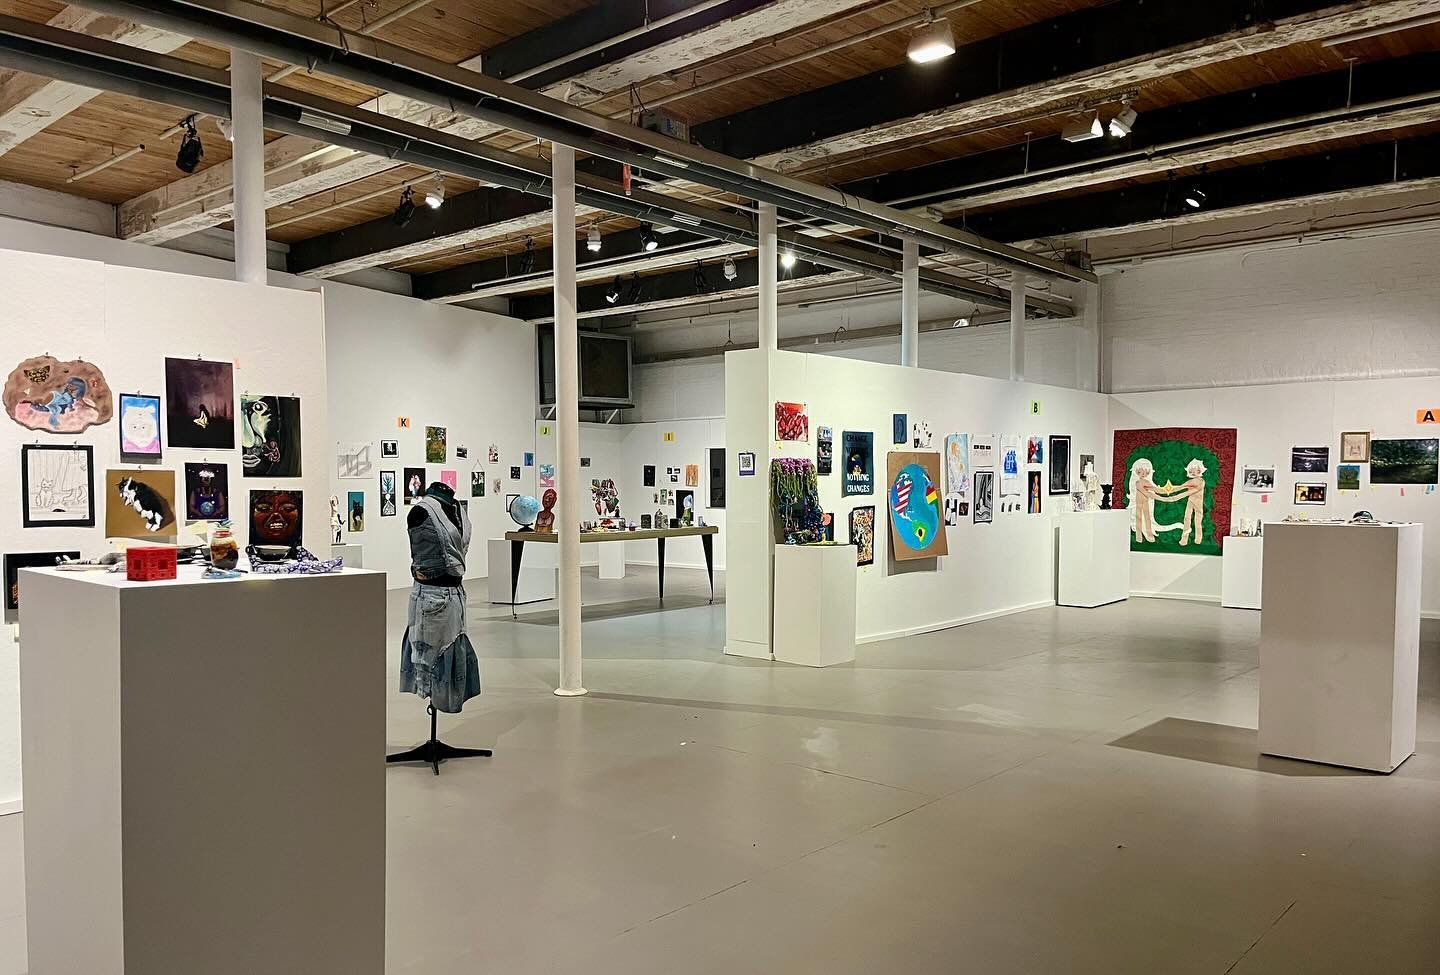 Congratulations to all the talented high school students who participated in the 12th annual MASS MoCA Teen Invitational last weekend! 

The Artist Book Foundation is a proud annual supporter of this important community event. This year, TABF&rsquo;s